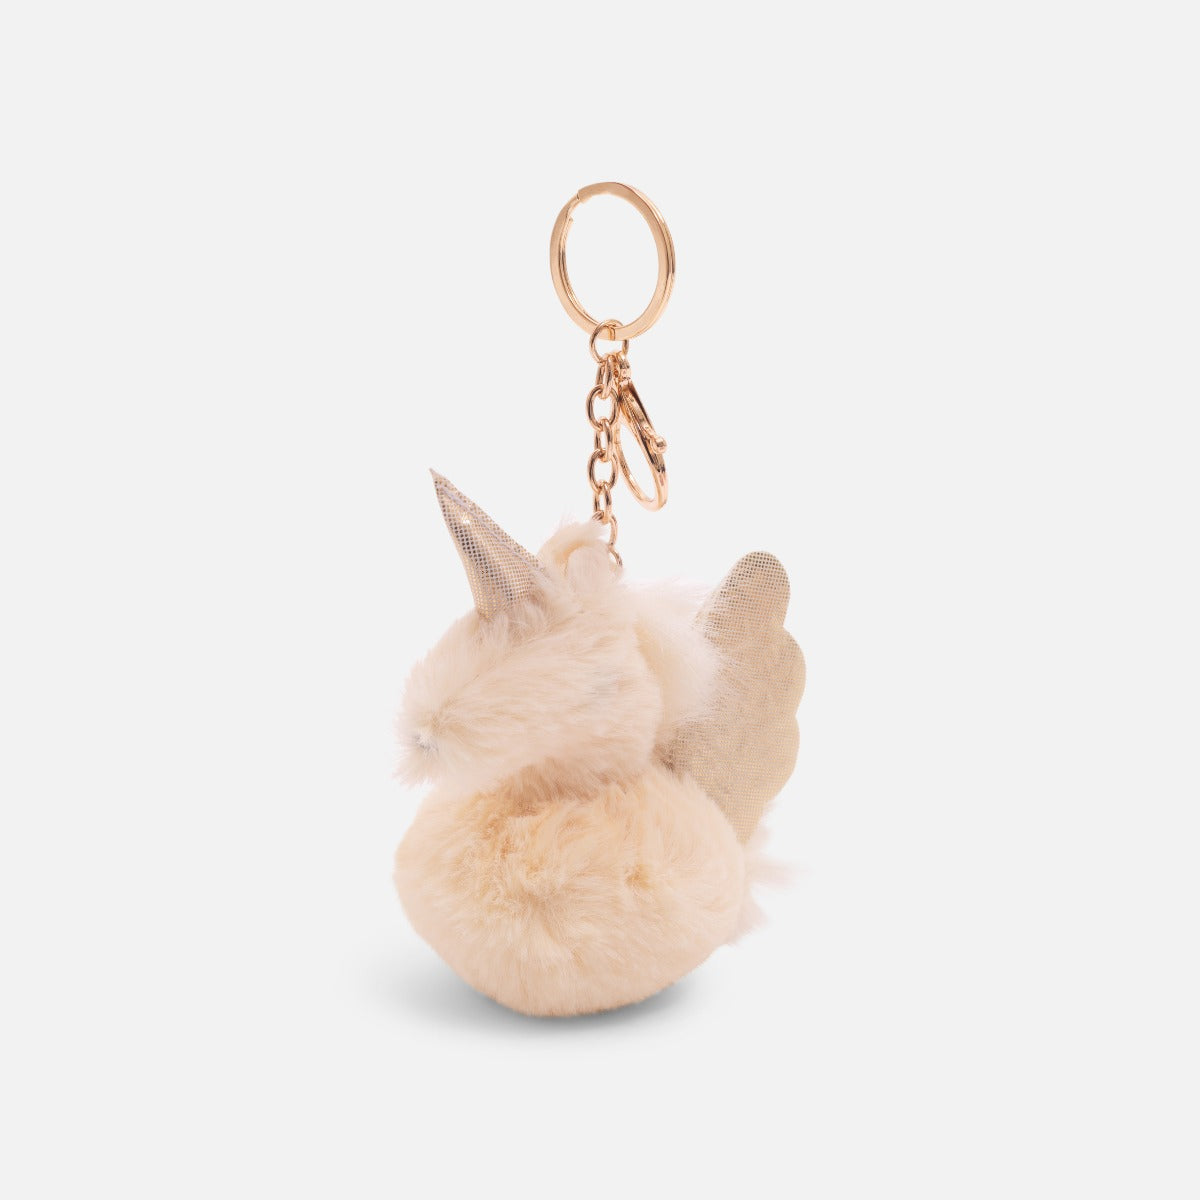 Beige keychain with shinny wings and corn